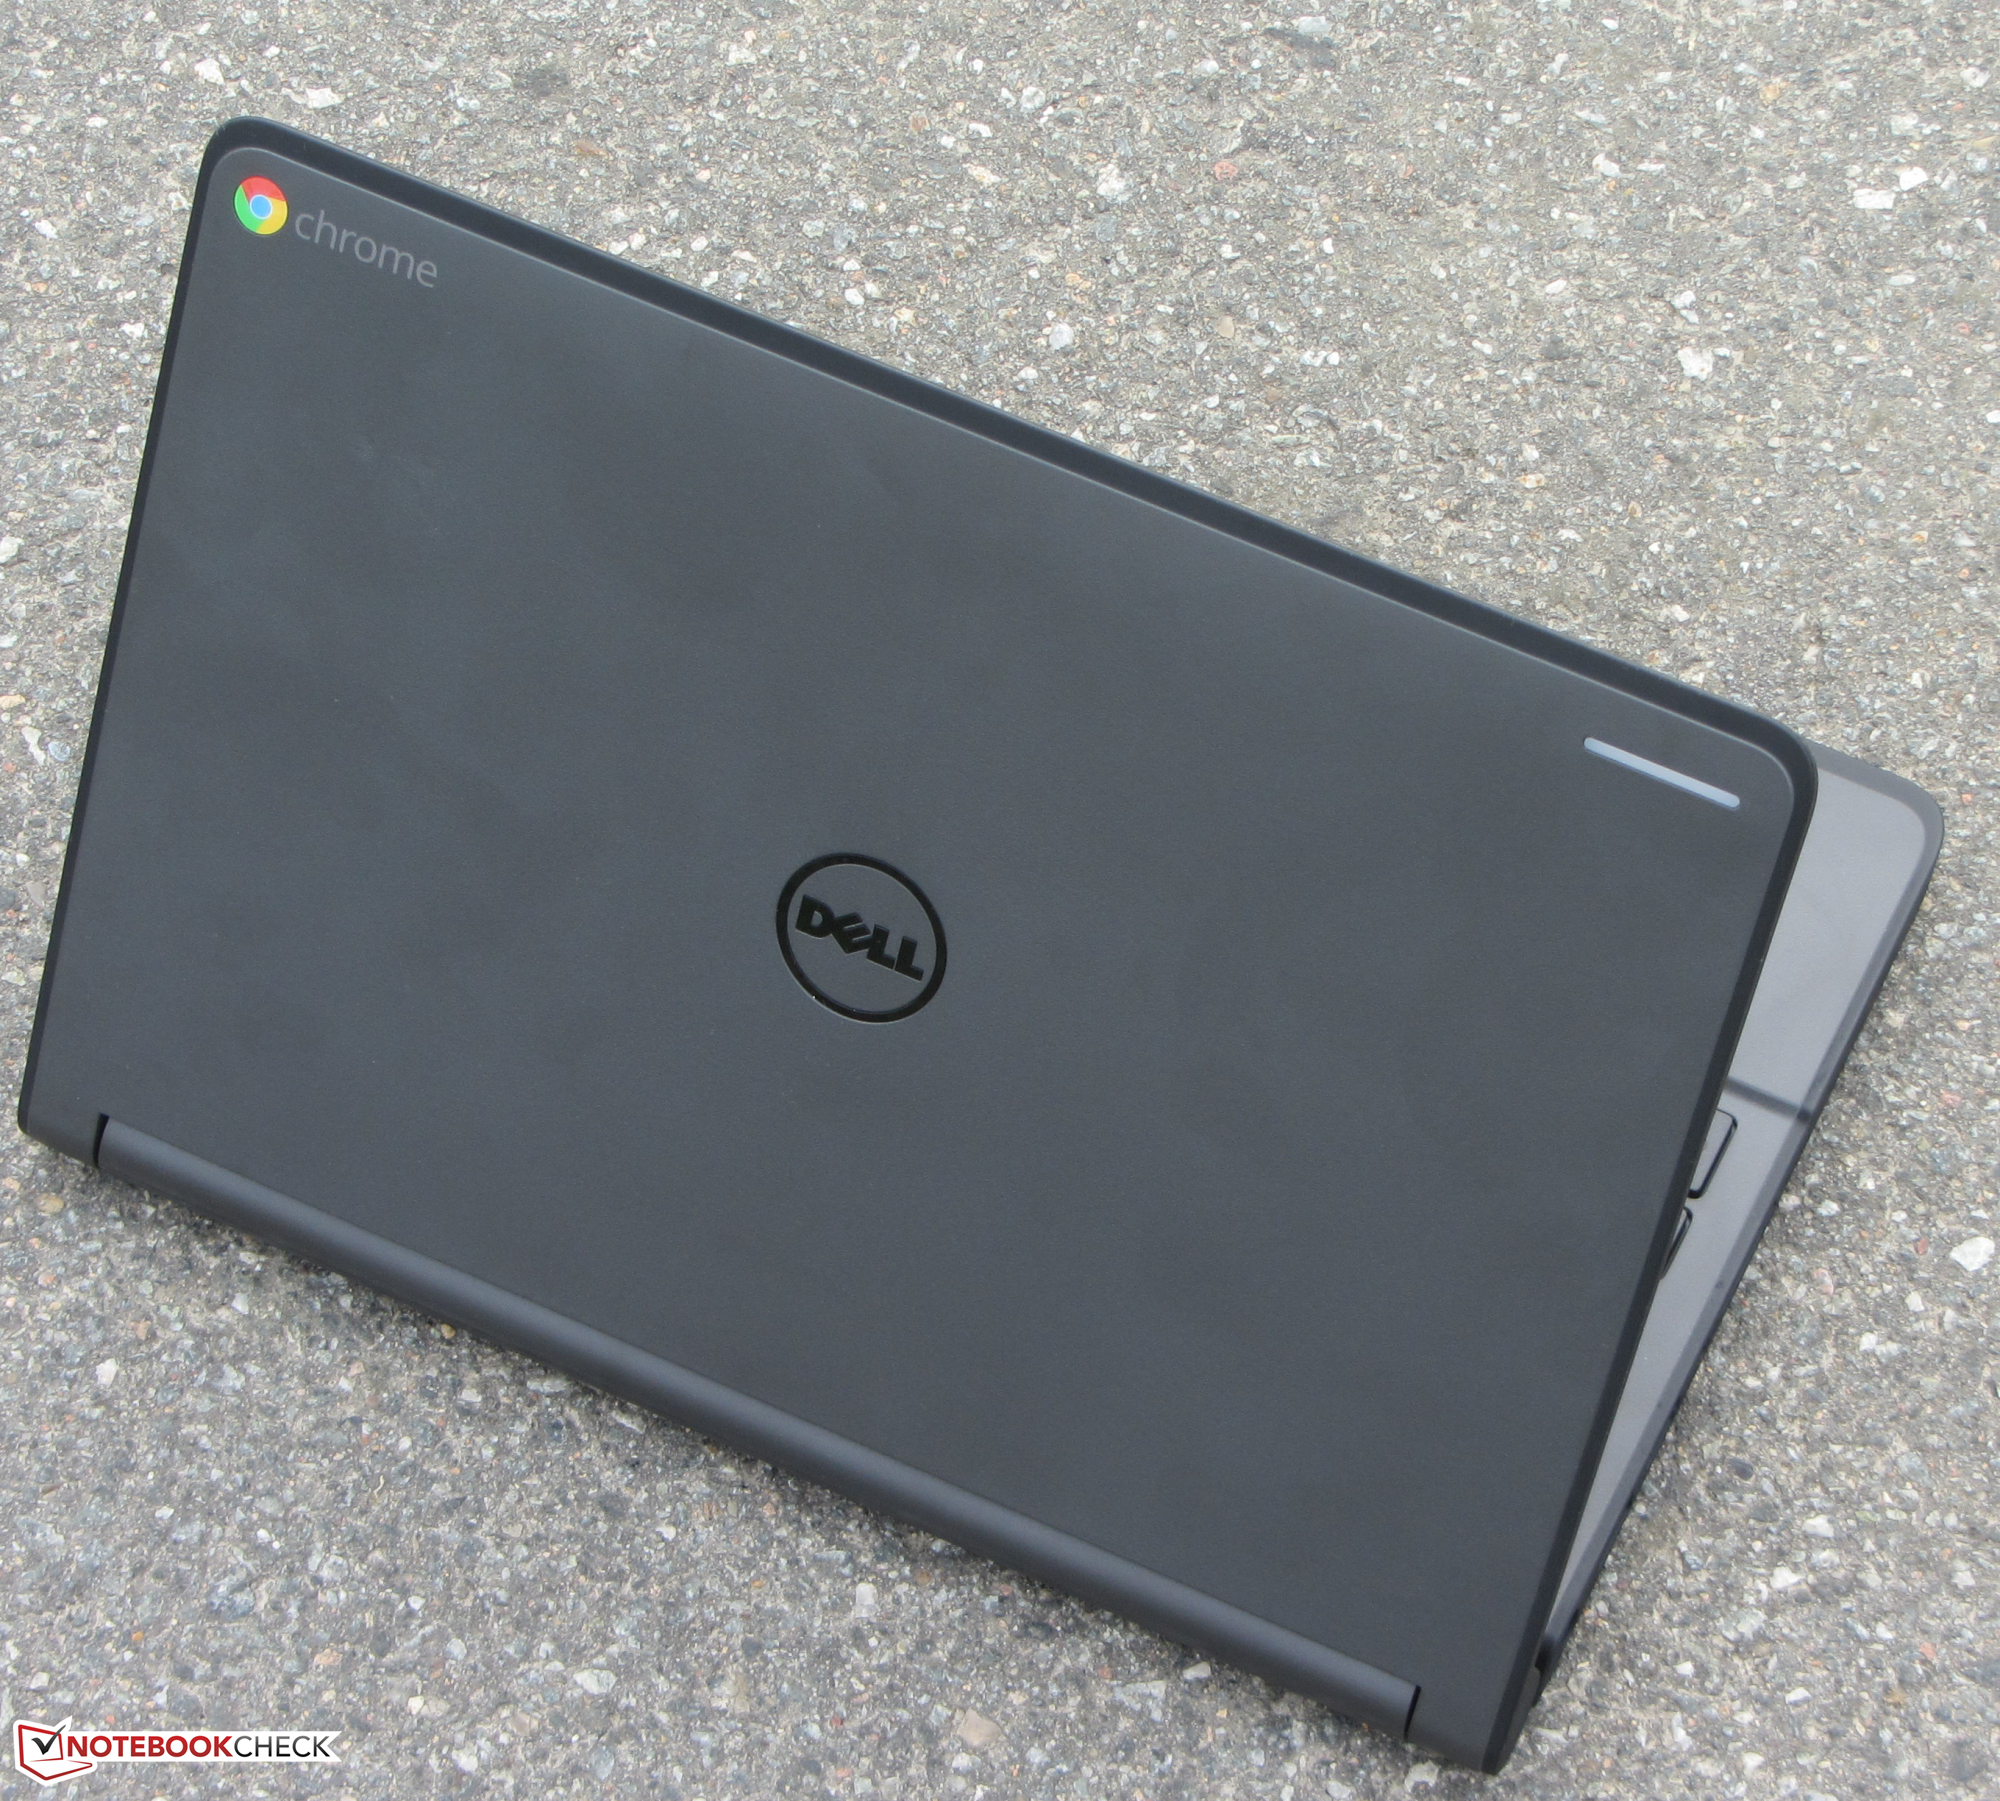 Dell Chromebook 11 (3120) Review - NotebookCheck.net Reviews